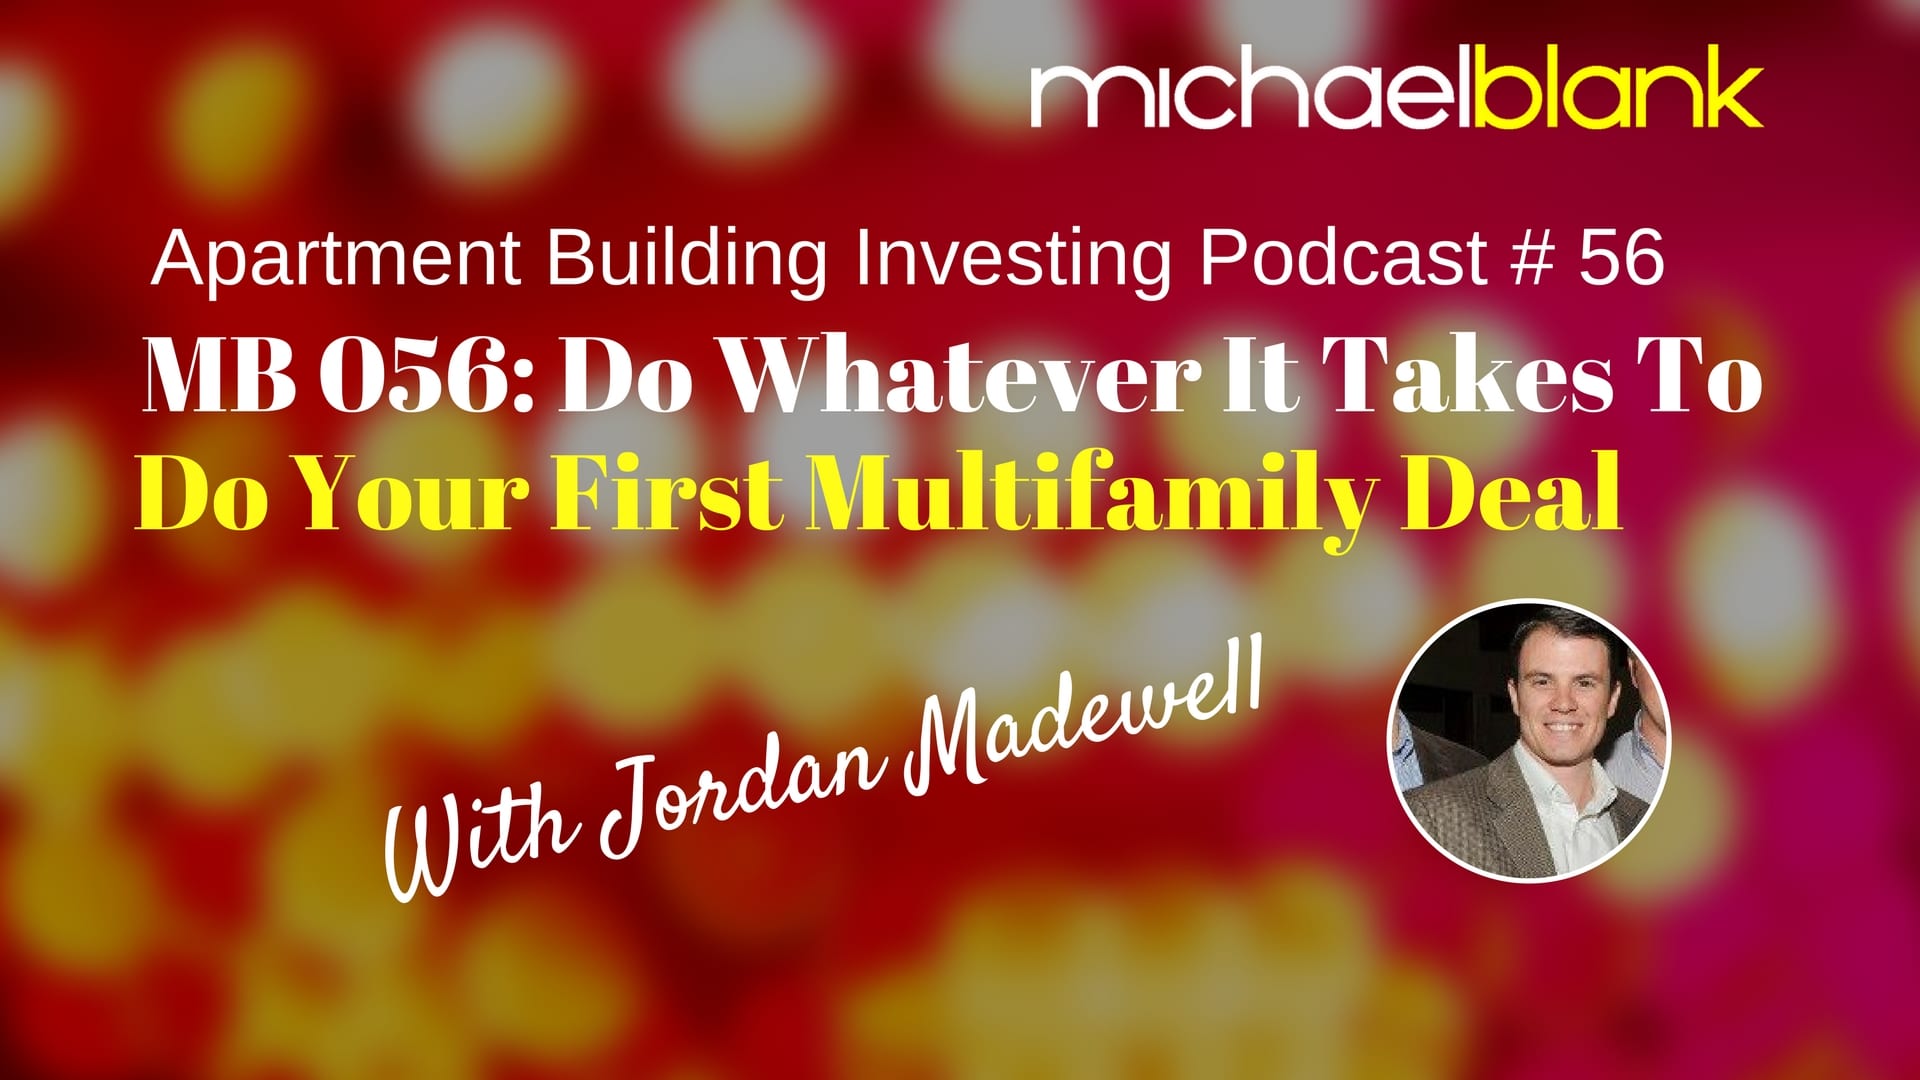 MB 056: Do Whatever It Takes To Do Your First Multifamily Deal – With Jordan Madewell